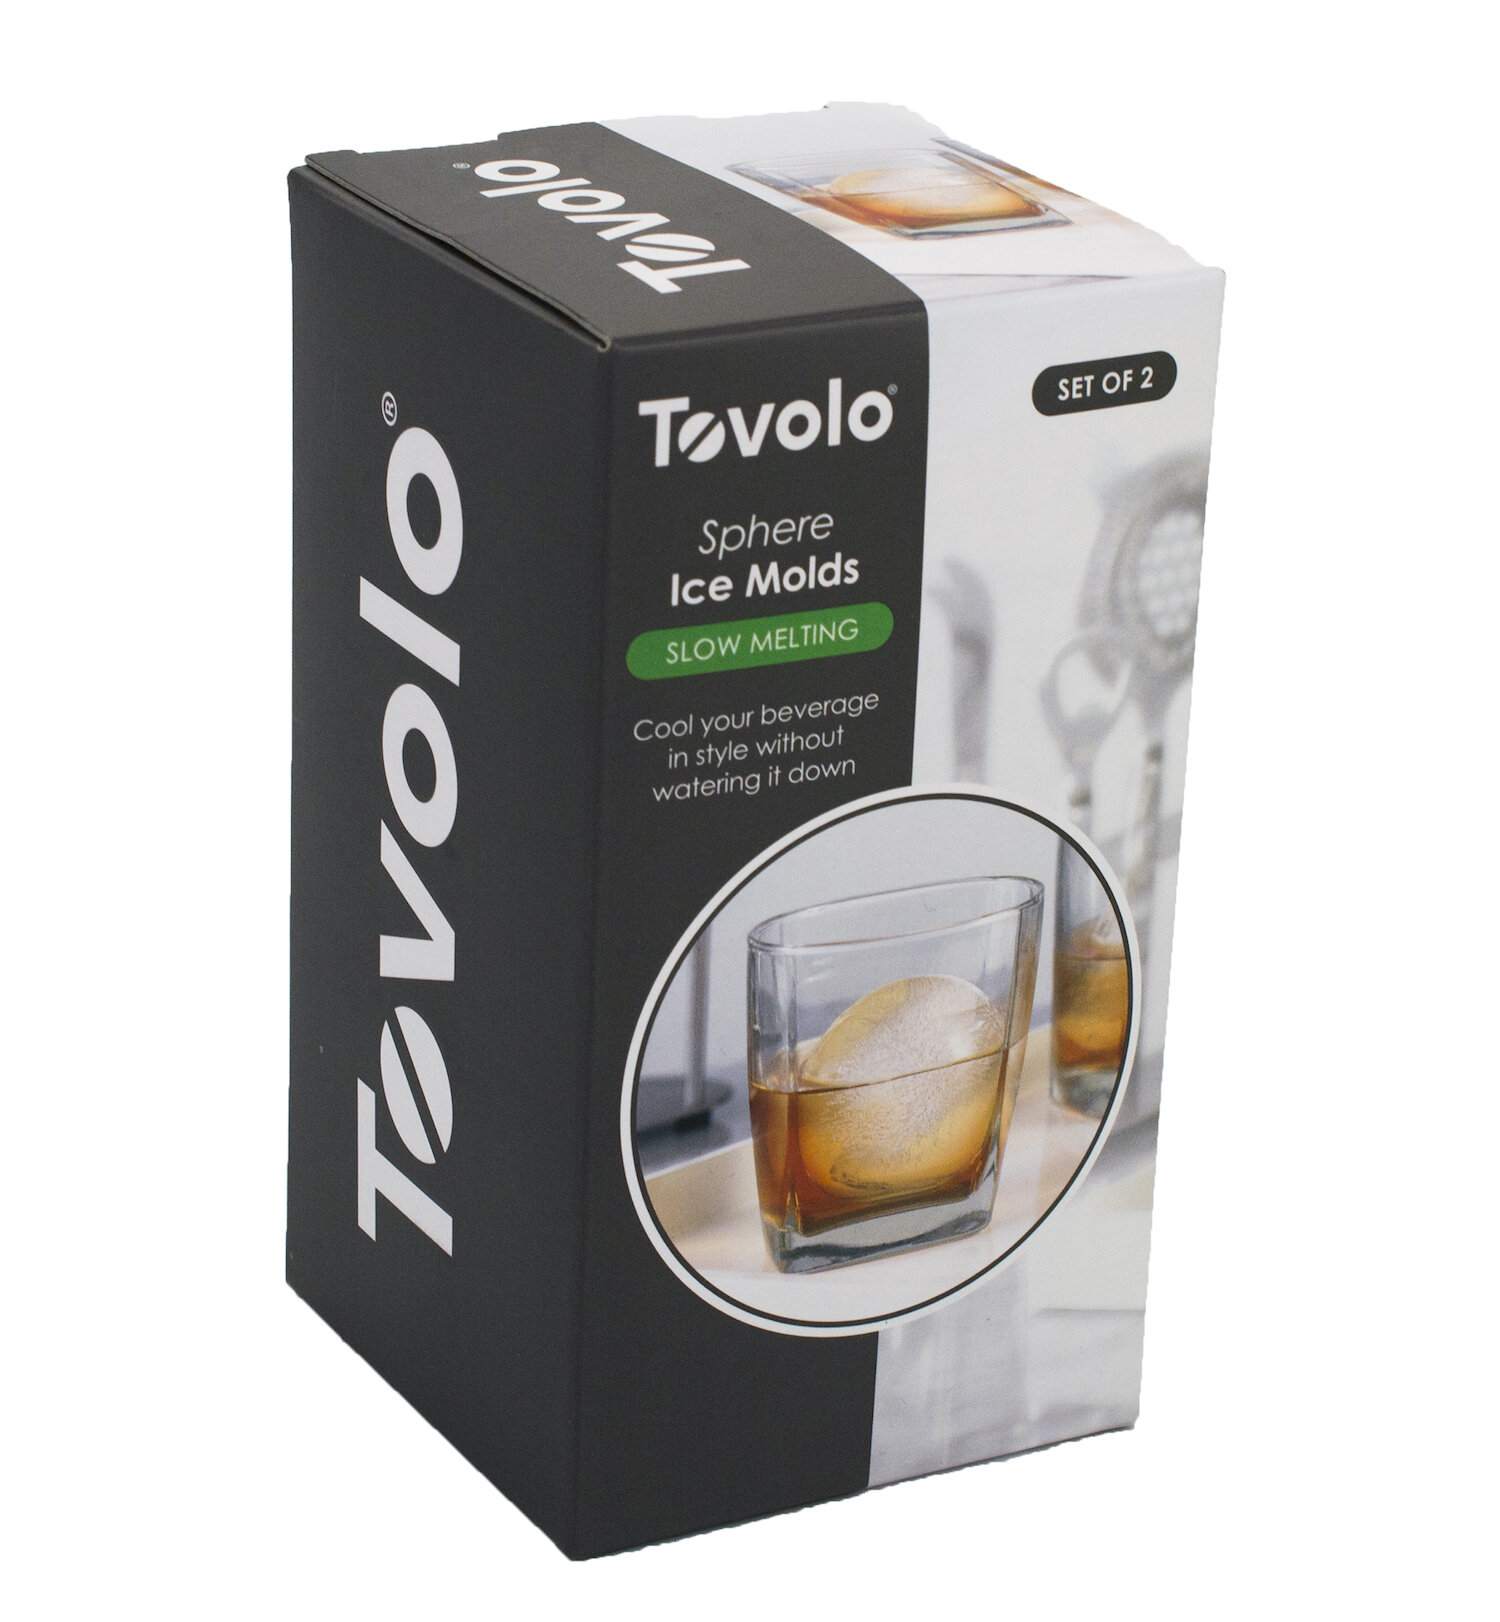 Tovolo Sphere Ice Molds, Set of 2